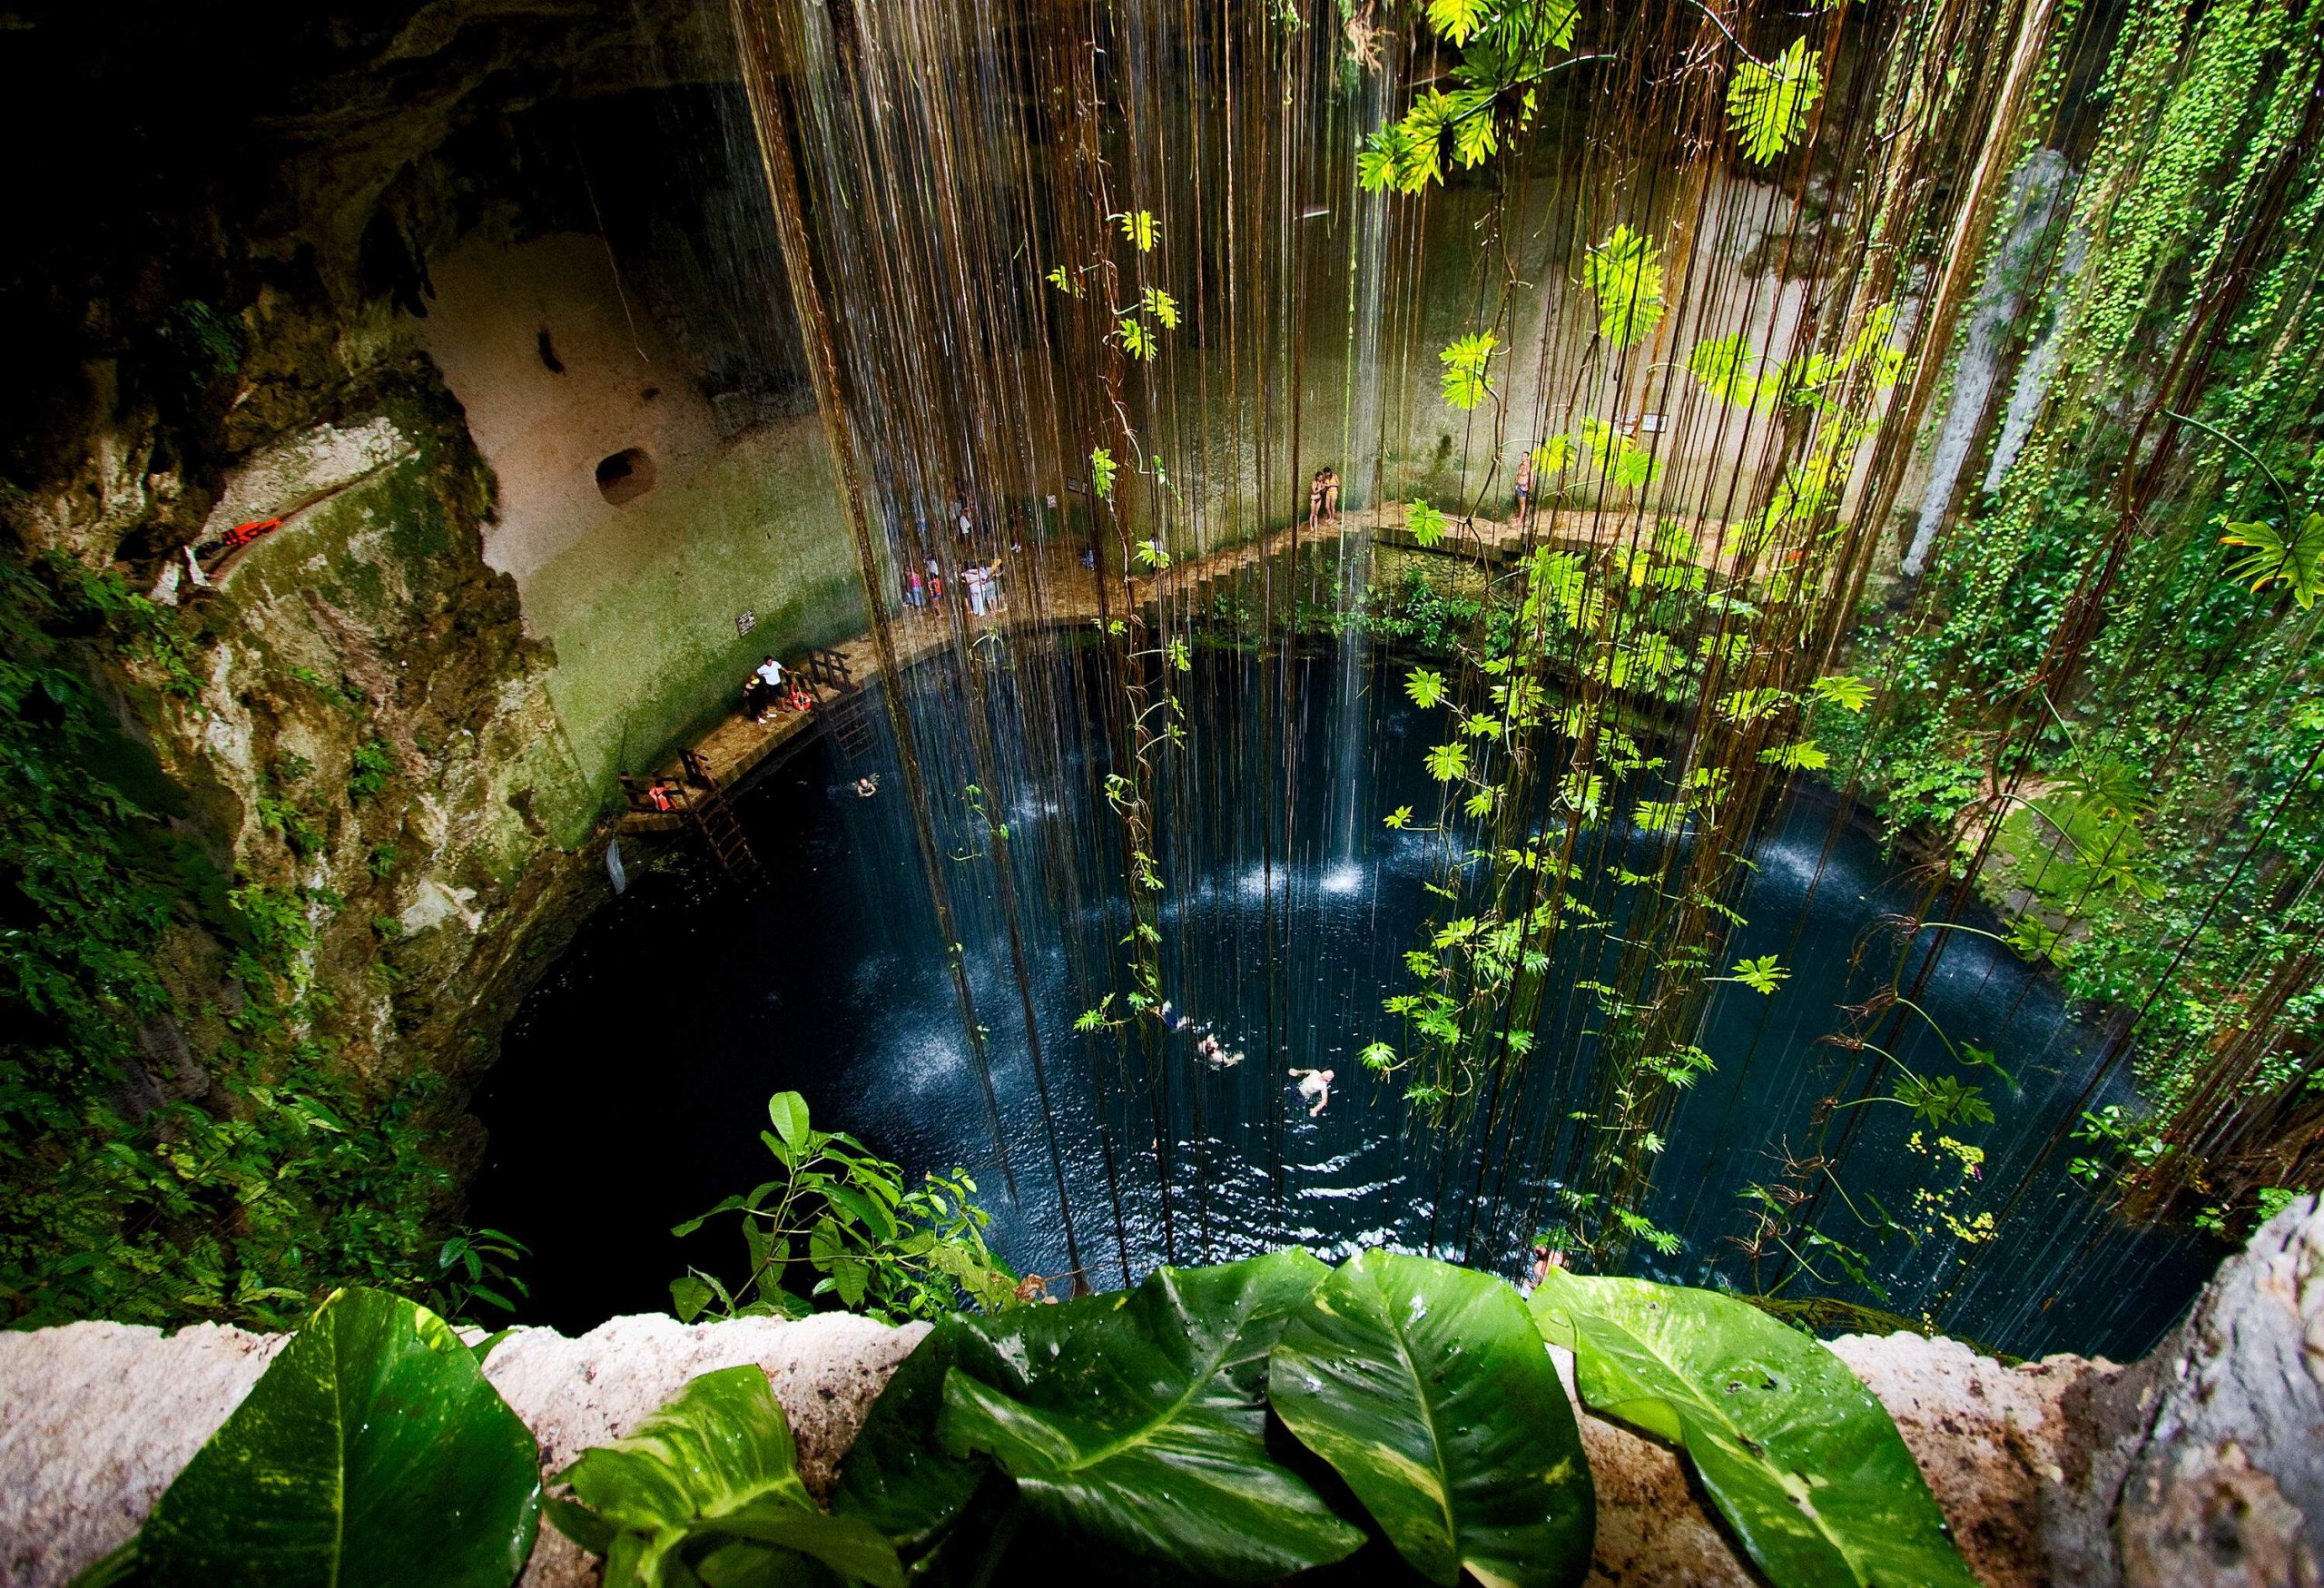 A fascinating deep natural pit with freshwater and hanging vines.